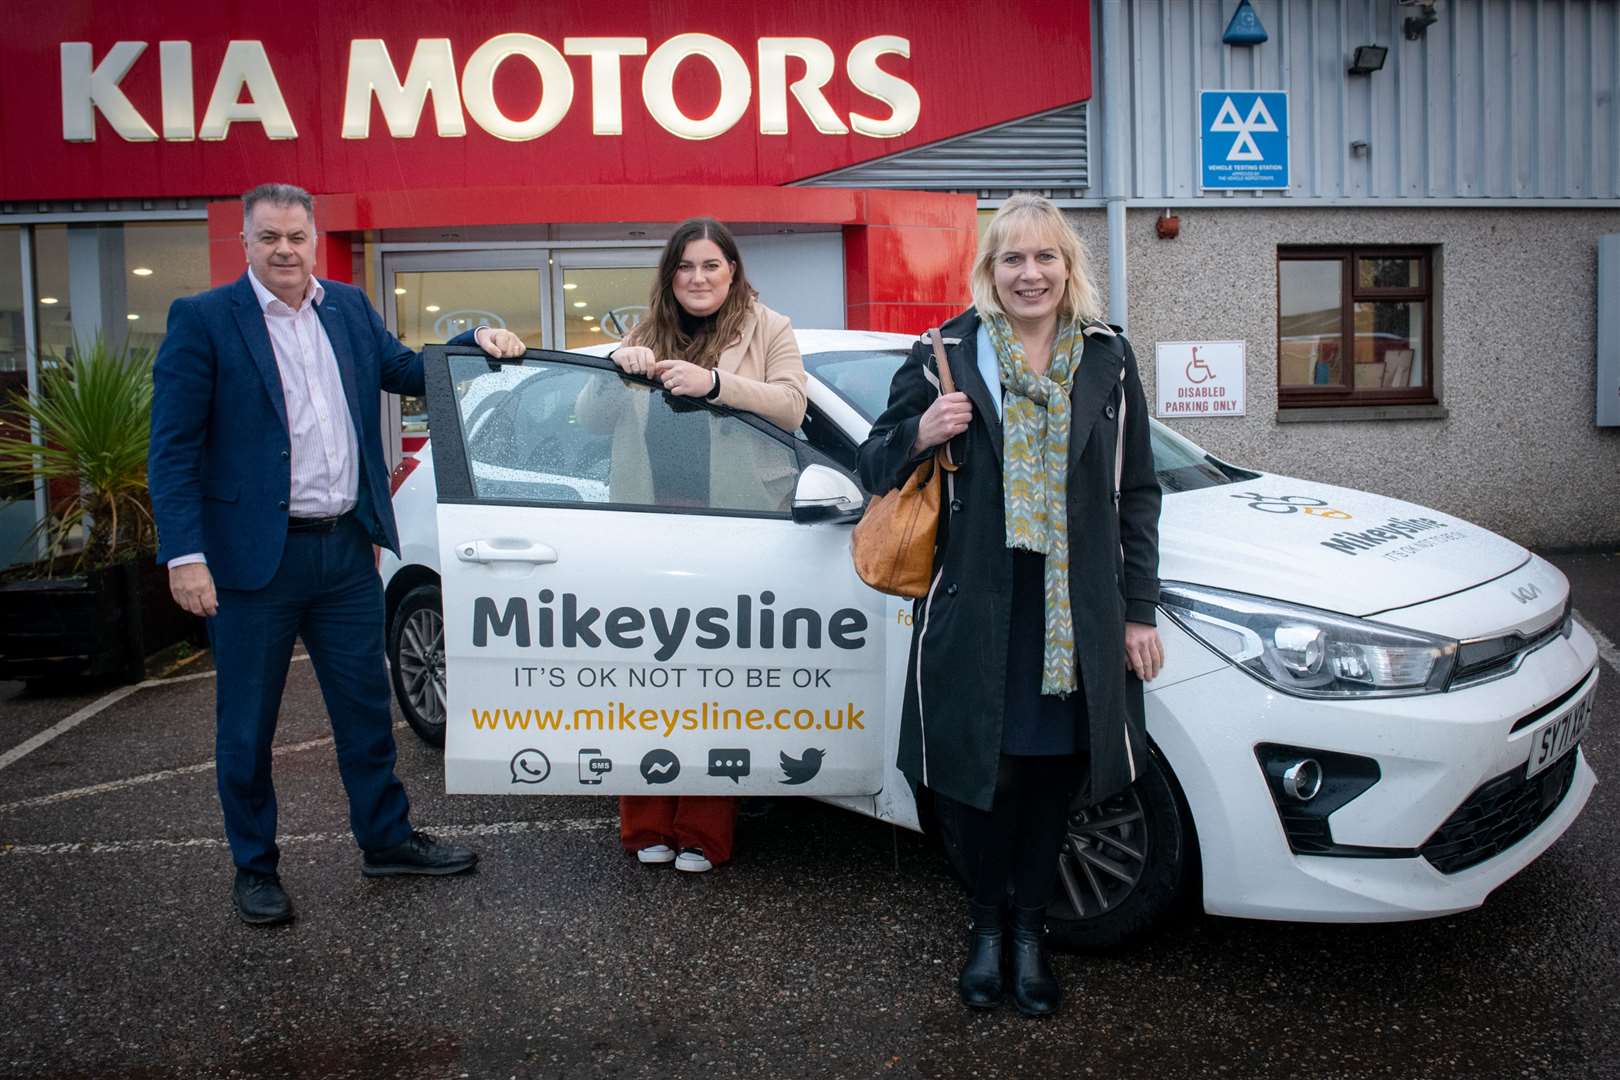 Sales director Jim Mackenize with Mikeysline’s Katie Melville and Emily Stokes.